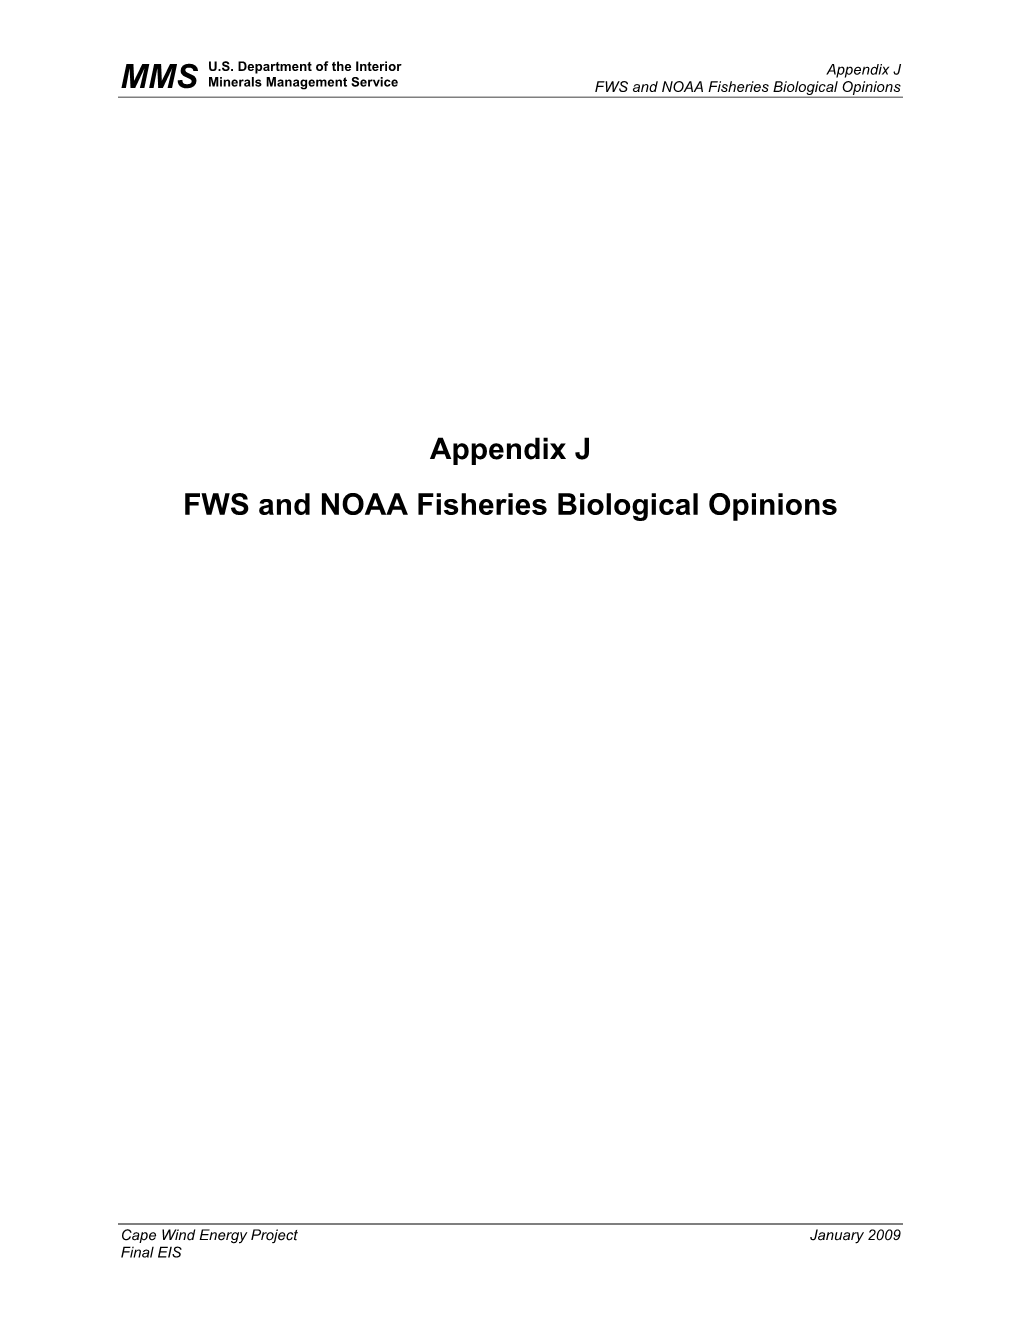 Appendix J FWS and NOAA Fisheries Biological Opinions